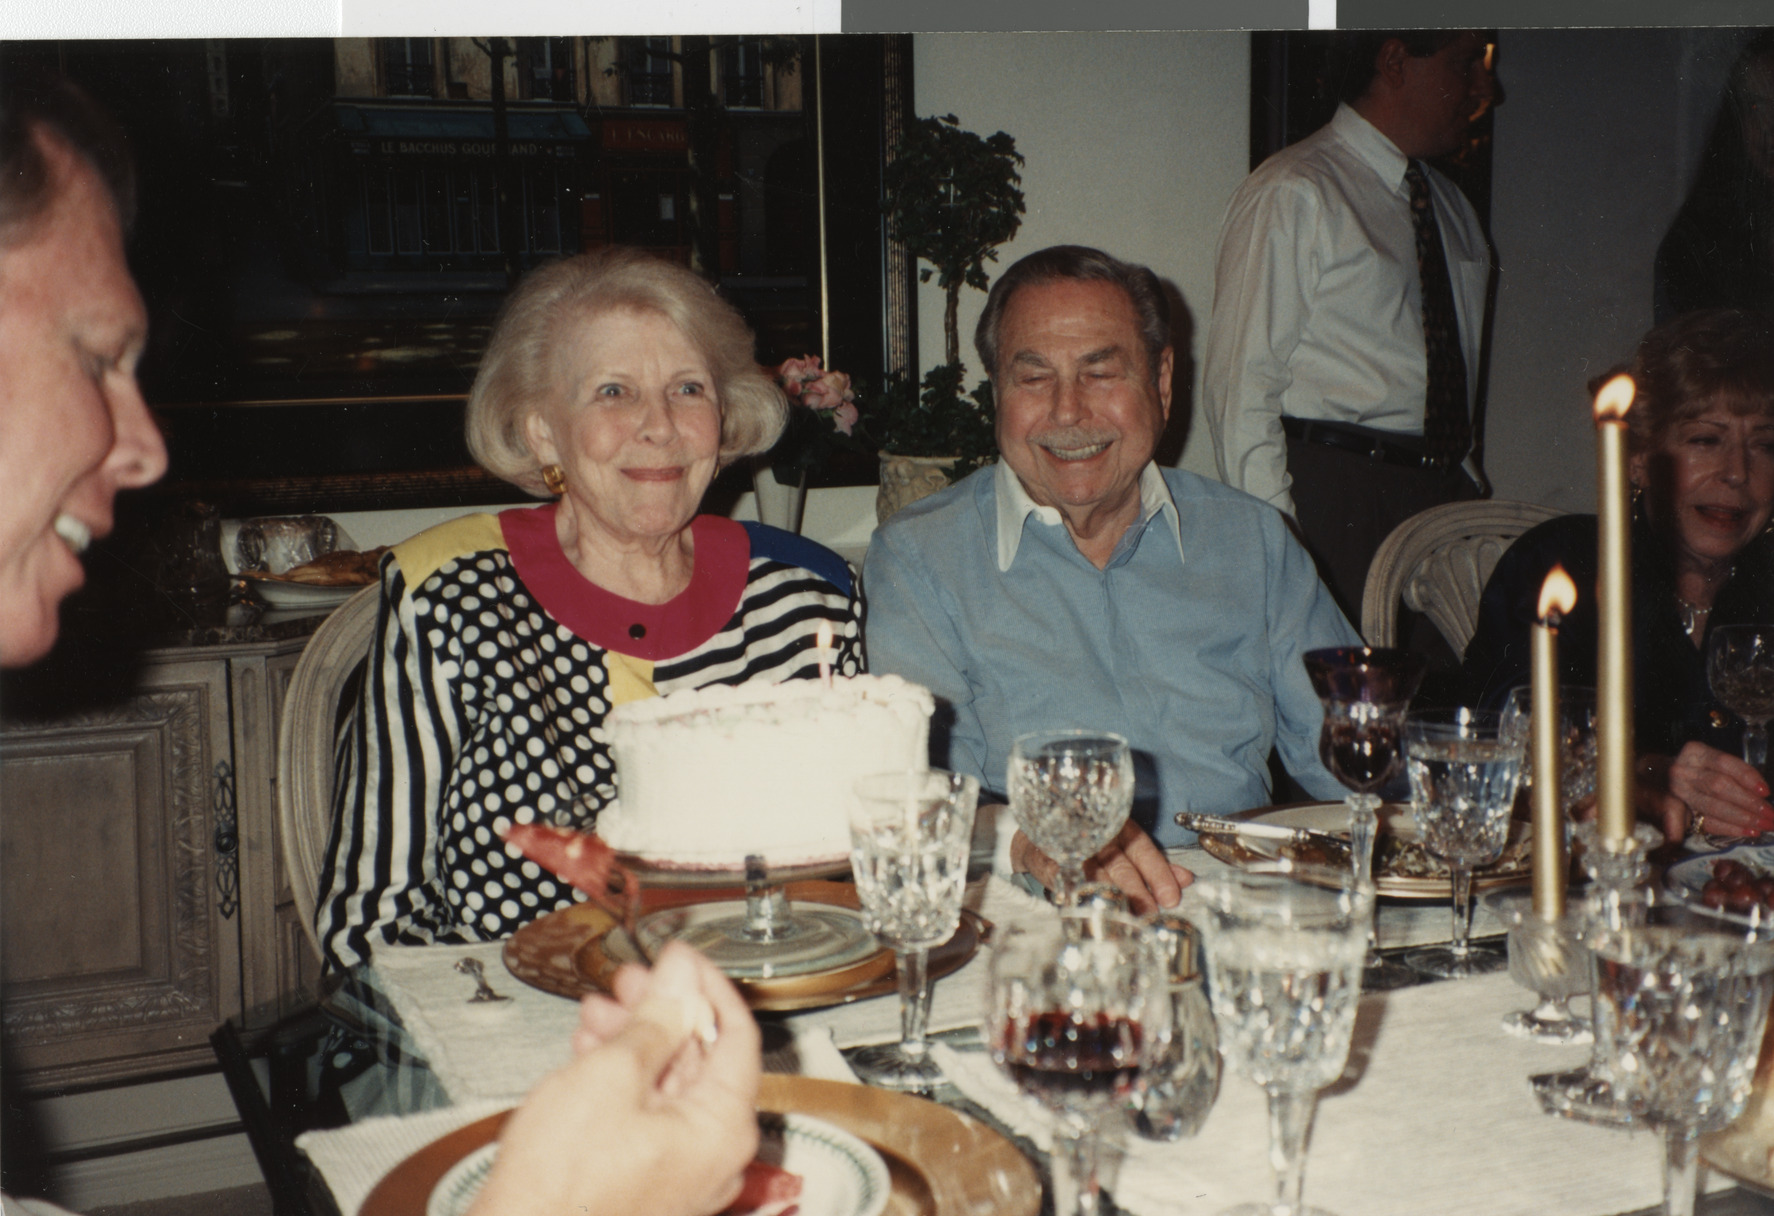 Photograph of Passover seder, 1994-1996